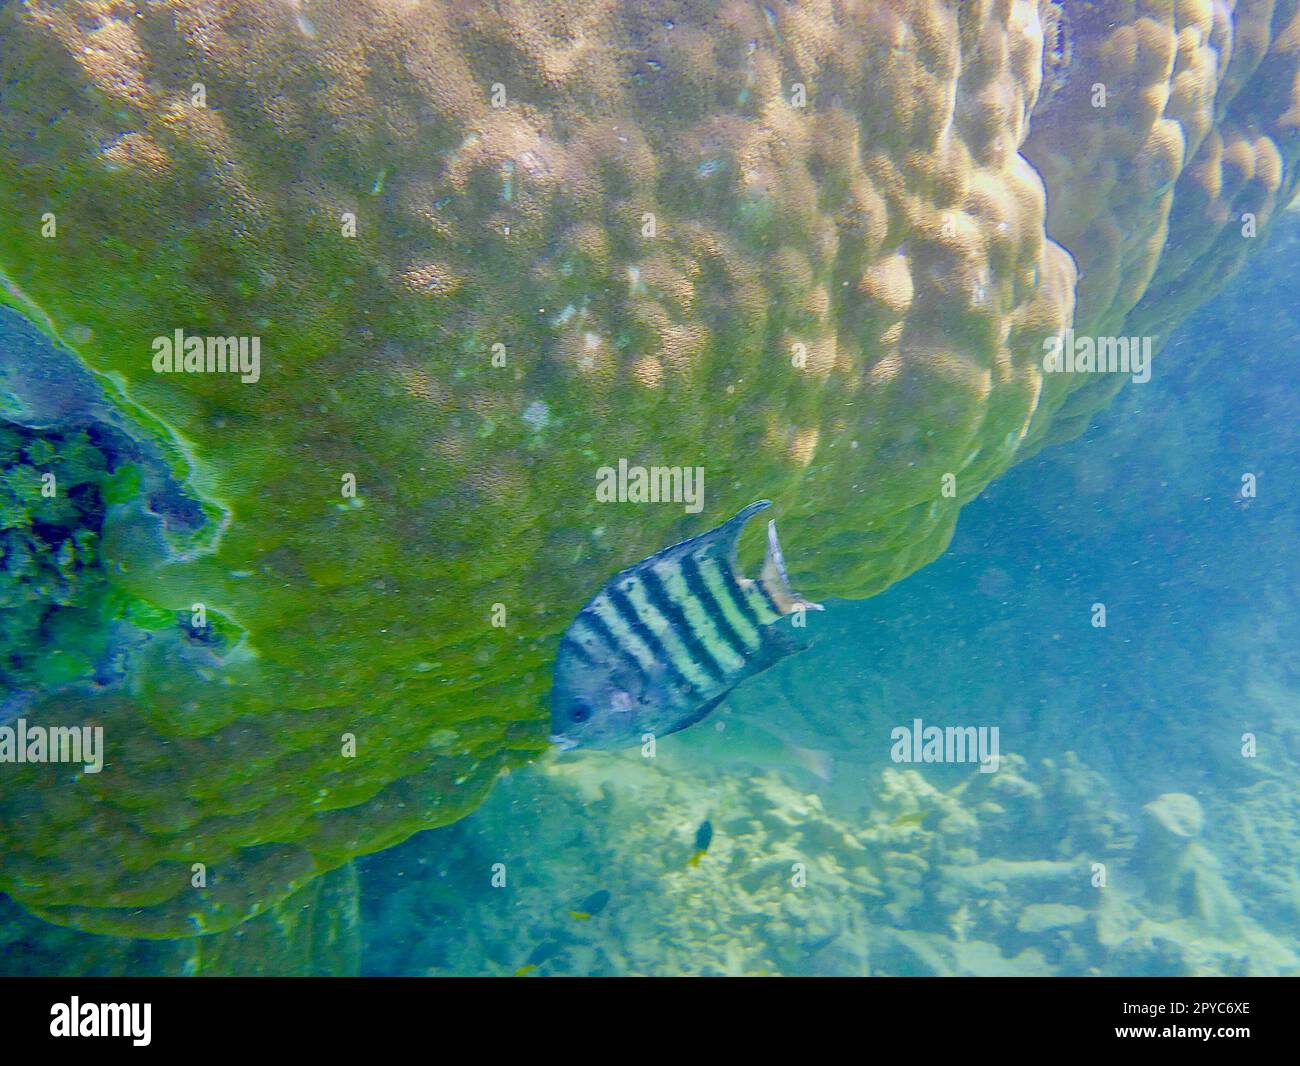 An underwater view of coral in the Great Barrier Reef of Australia Stock Photo